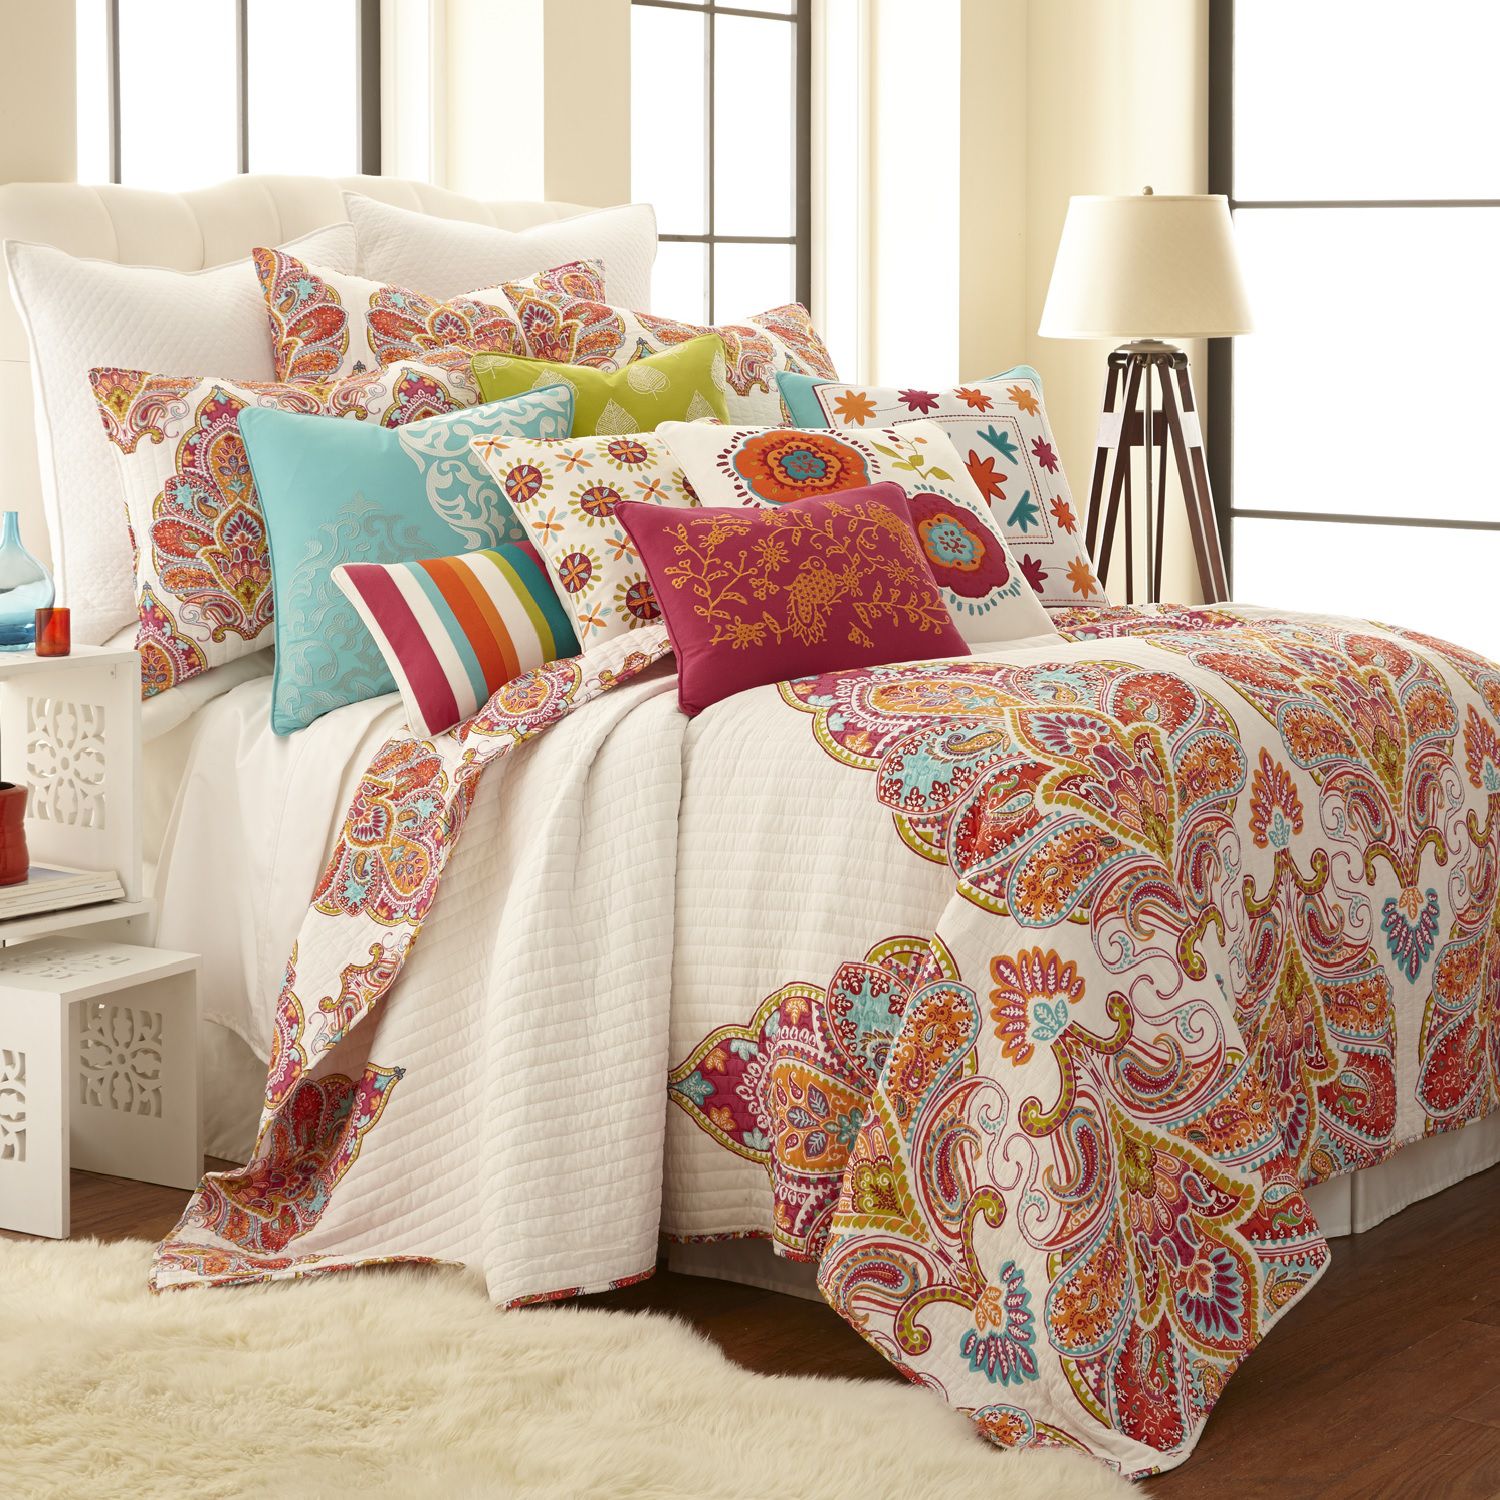 Image for Levtex Home Tivoli Bone Quilt Collection at Kohl's.